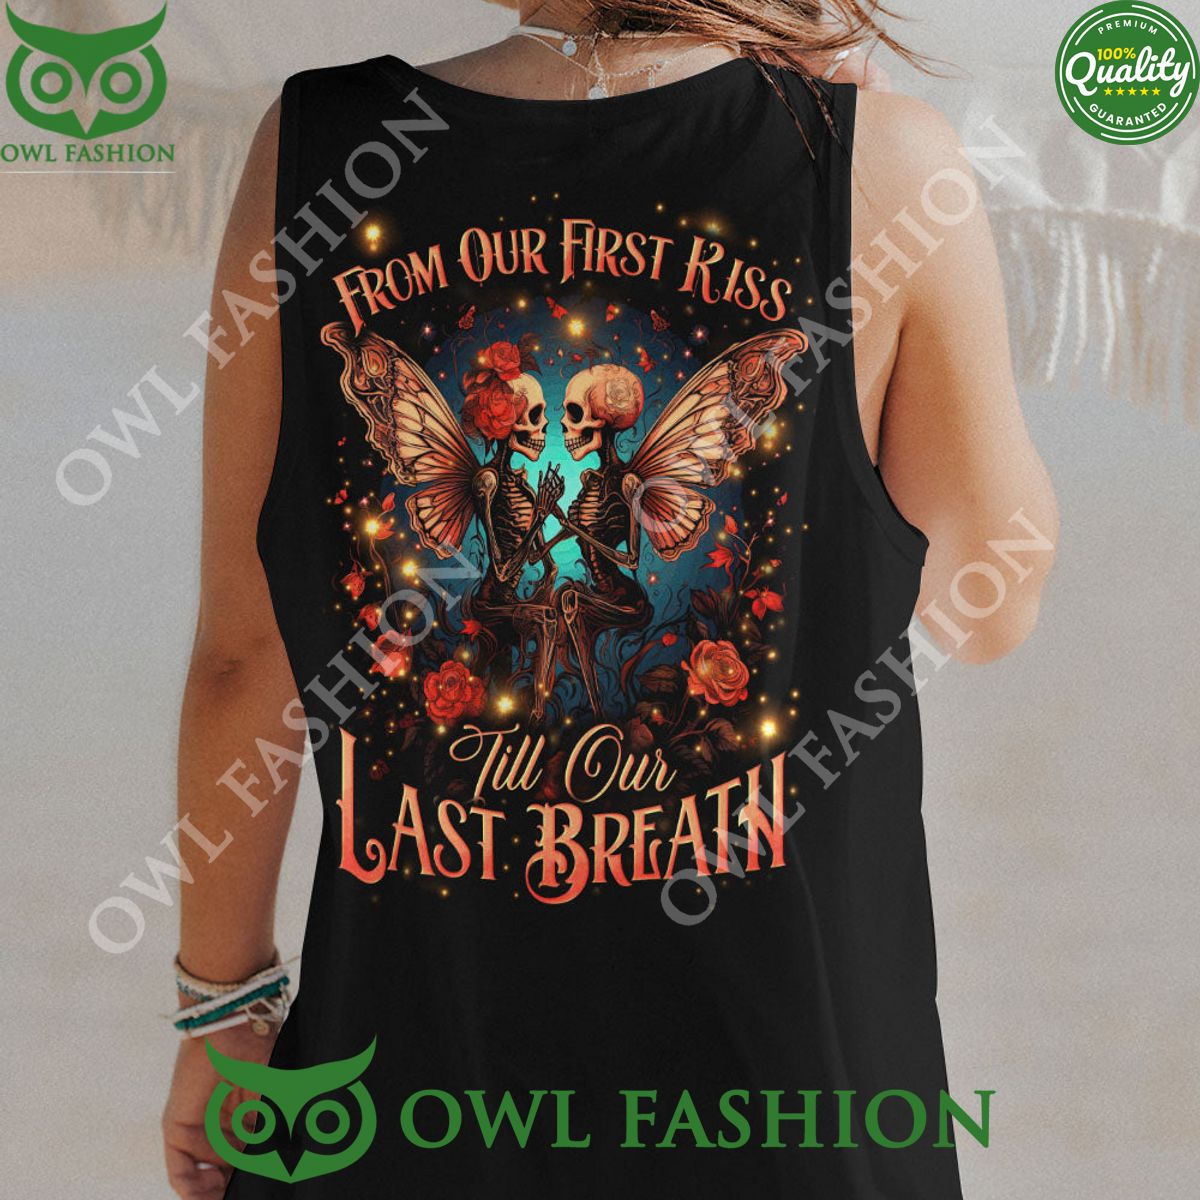 from our first kiss skull aop till our last breath rose hoodie 9 2L4My.jpg